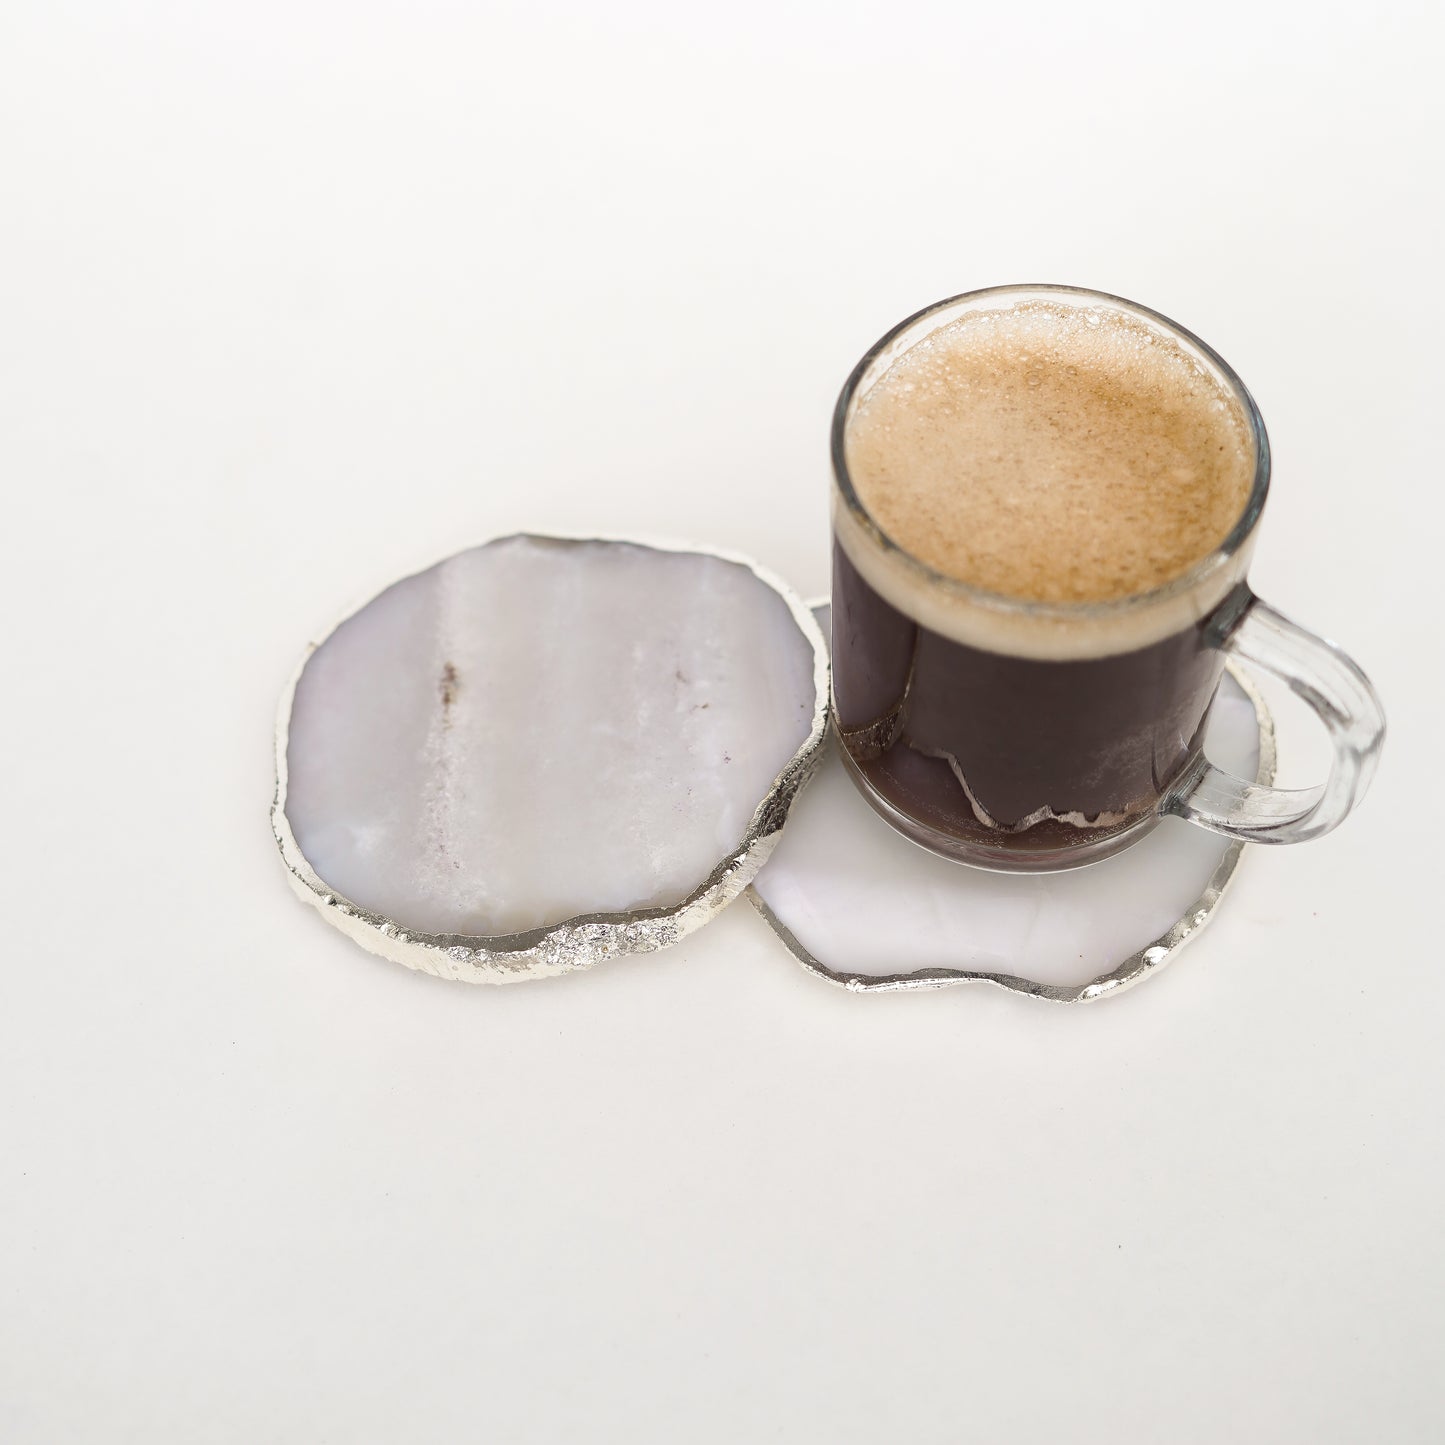 Brazilian Agate Stone Silver Plated Coaster Beautiful Coaster Fit for Tea Cups Coffee Mugs and Glasses Perfect Table Accessories Tableware Set of 2- Natural White